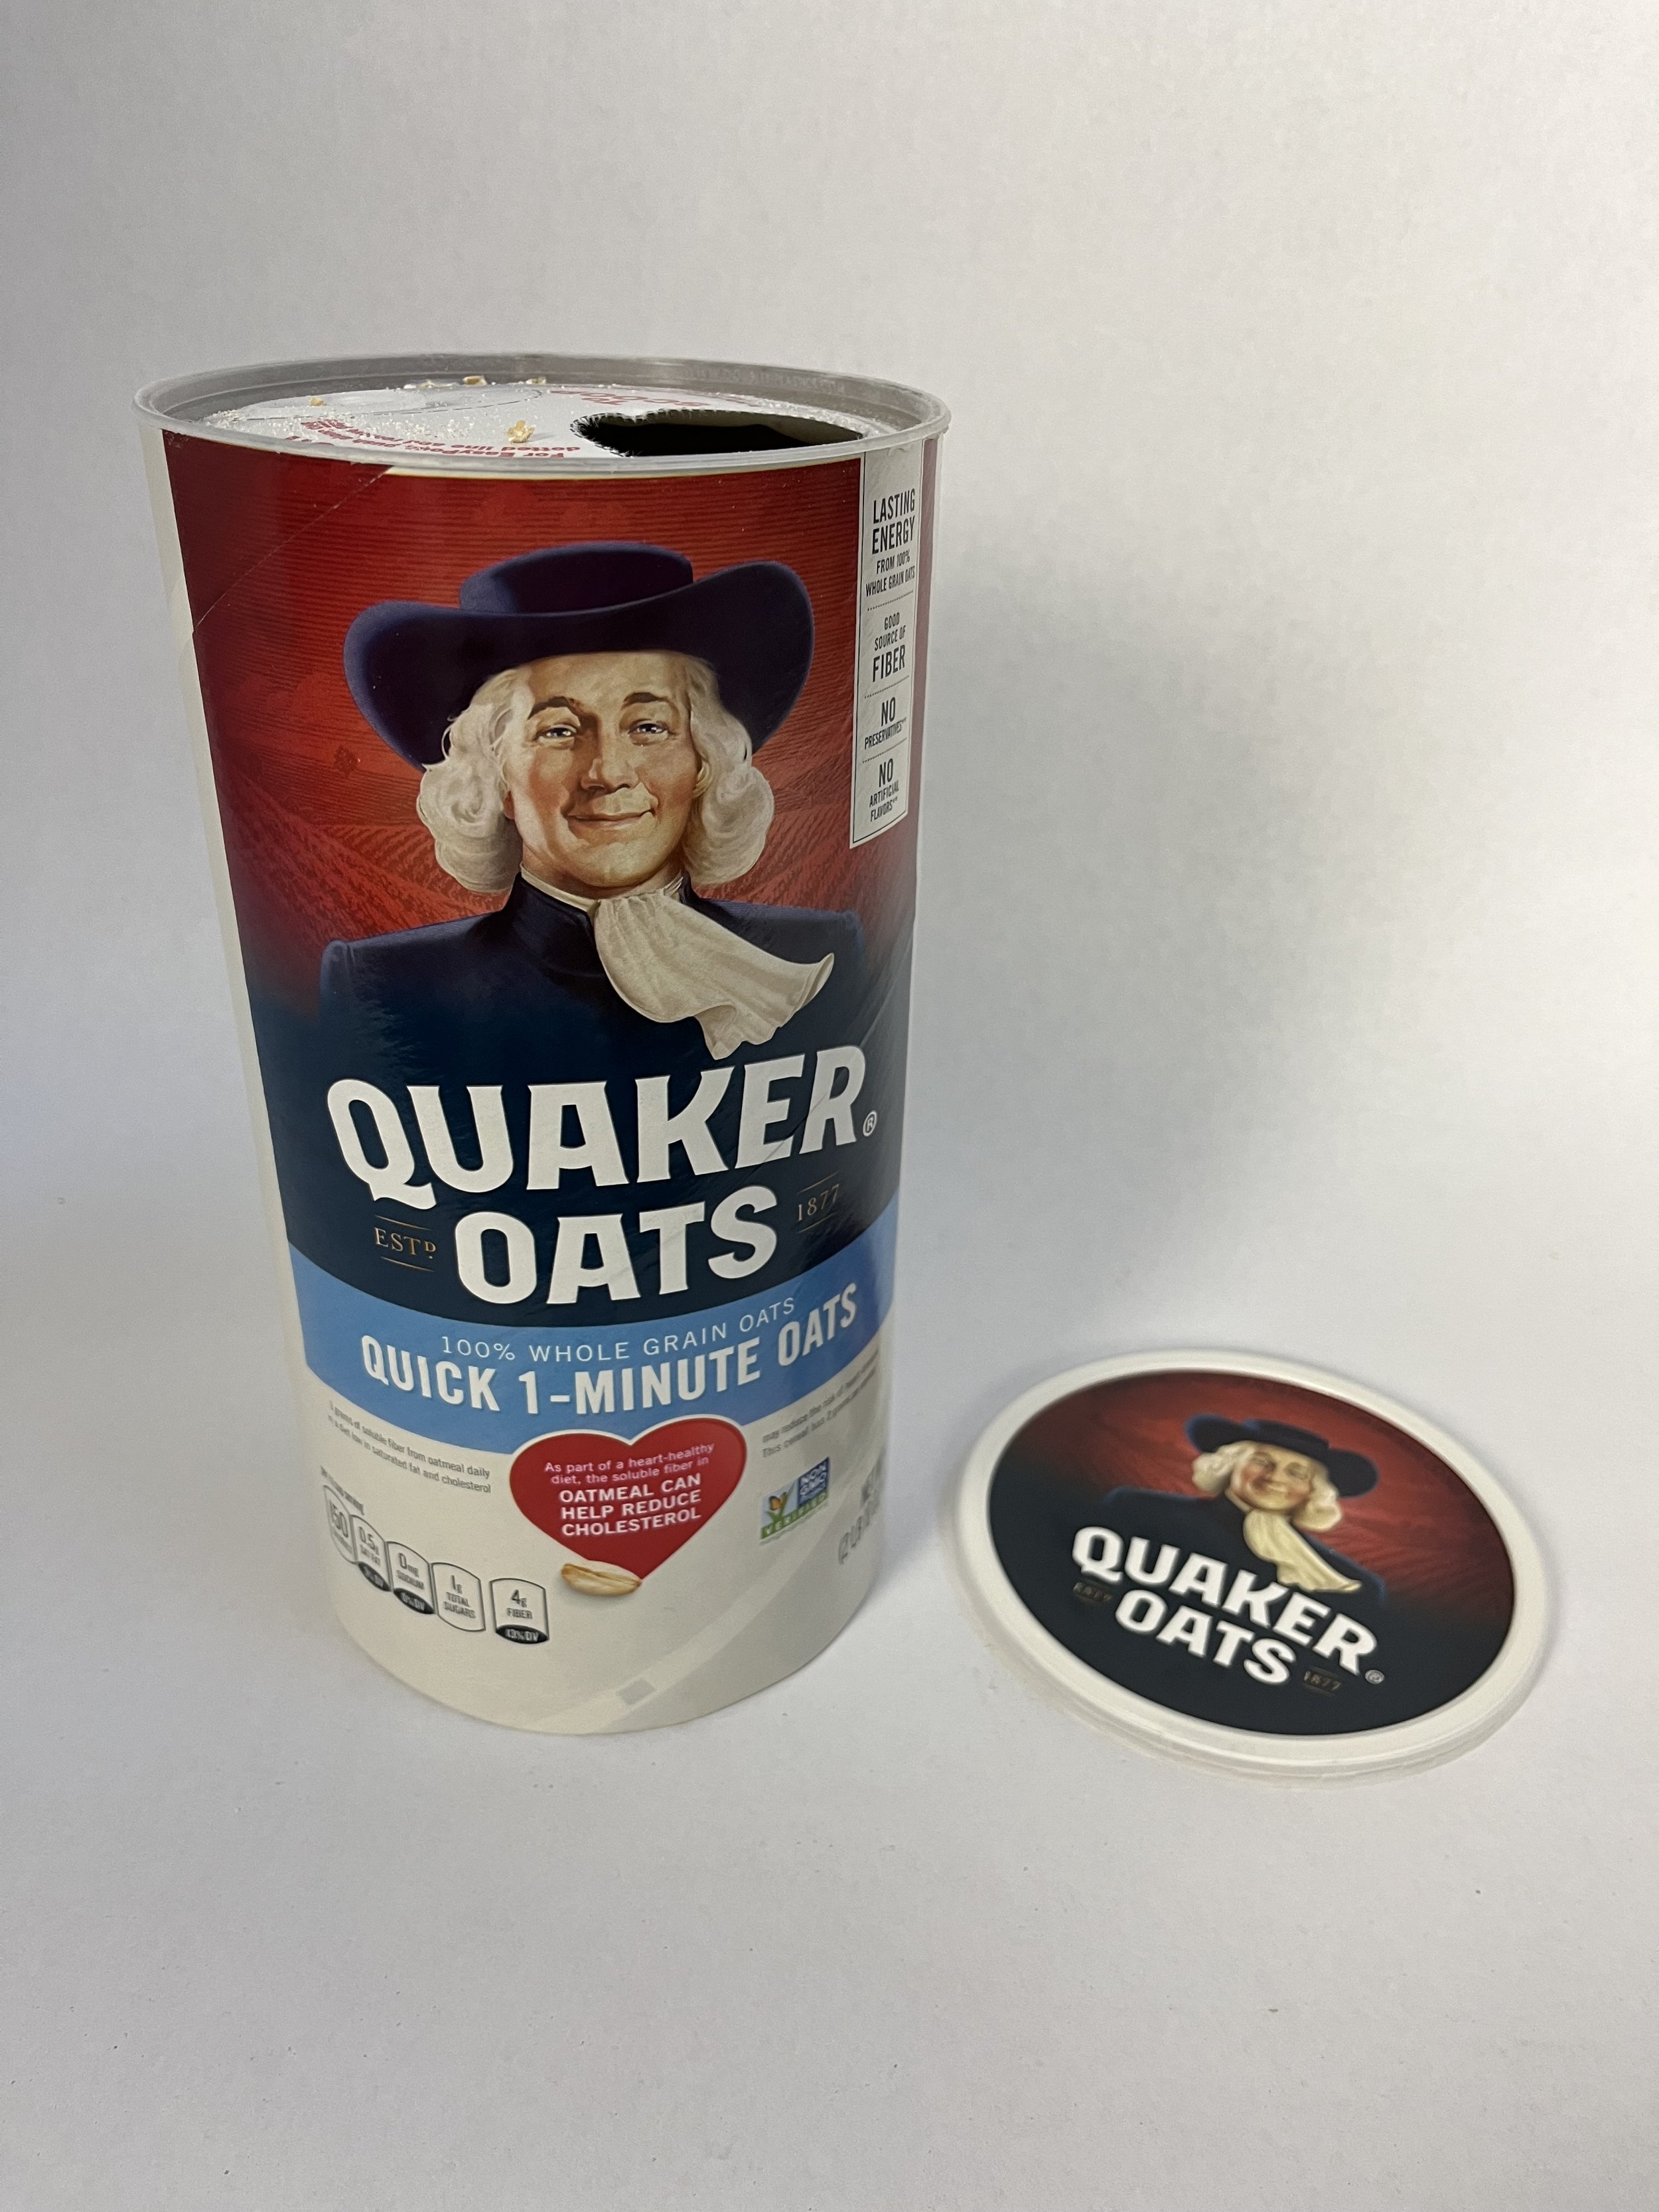 Quaker Oats and The Design of Everyday Things — The BYU Design Review